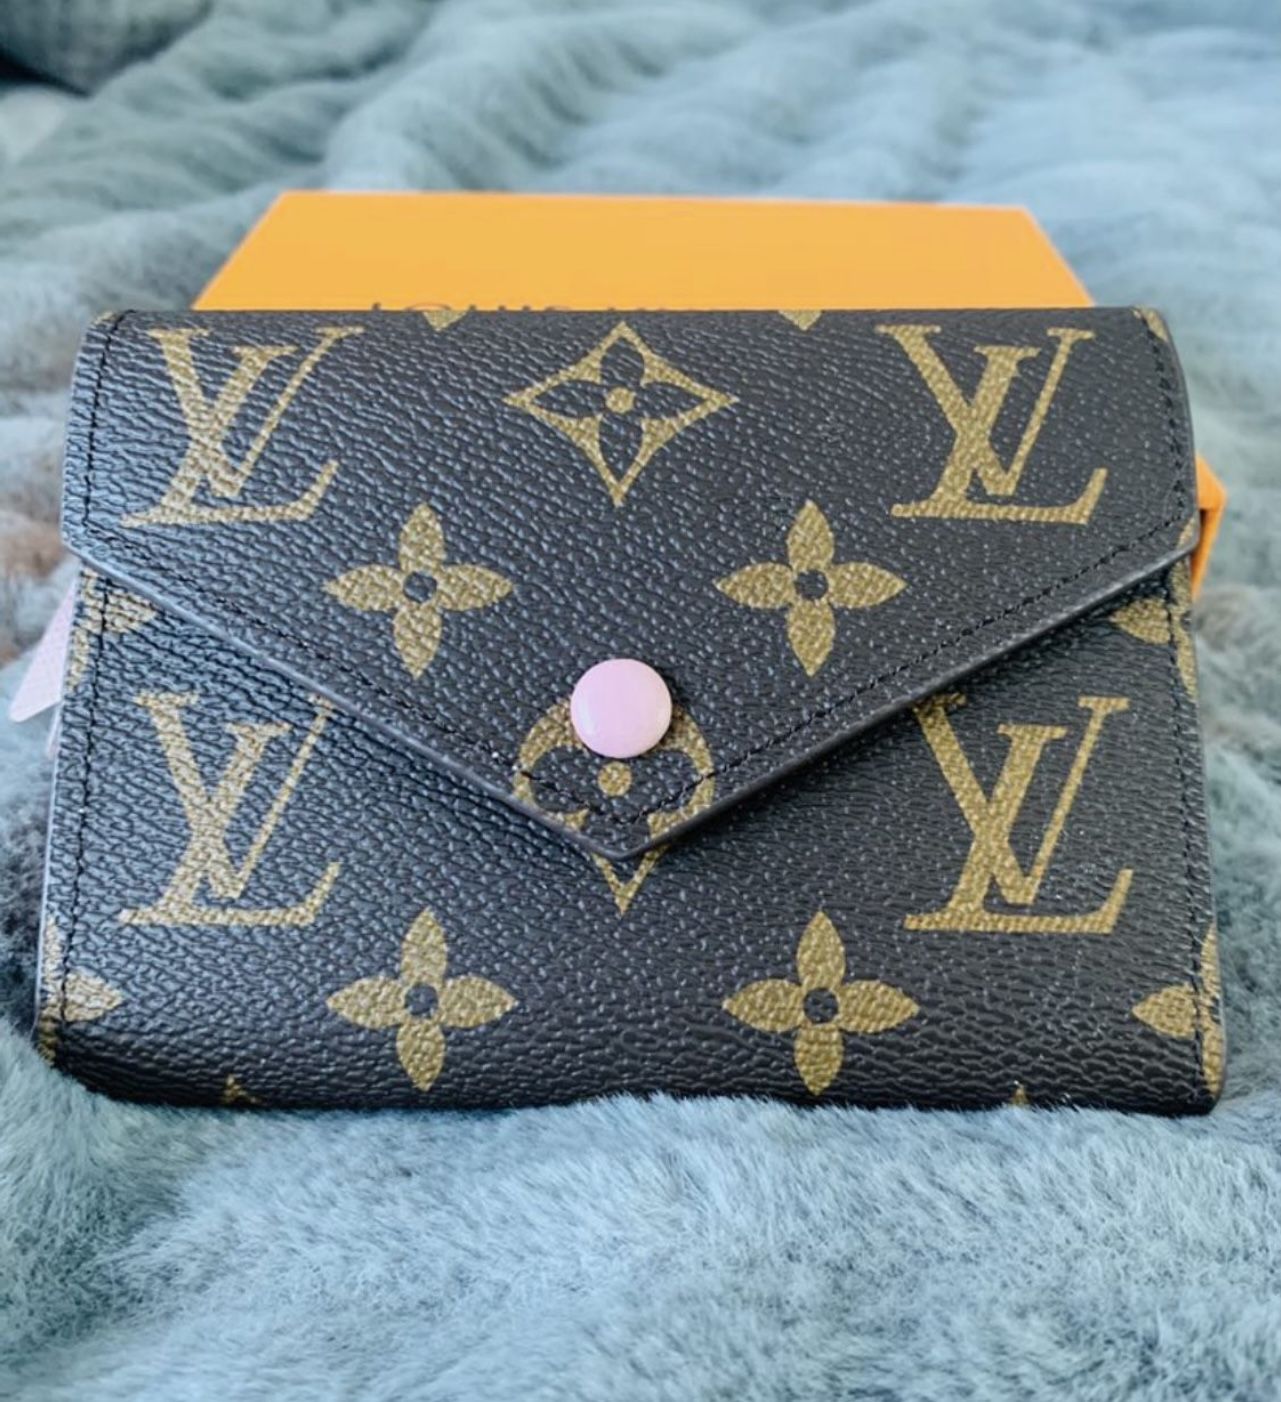 LV Wallet top quality comes with dust bag. for Sale in Victorville